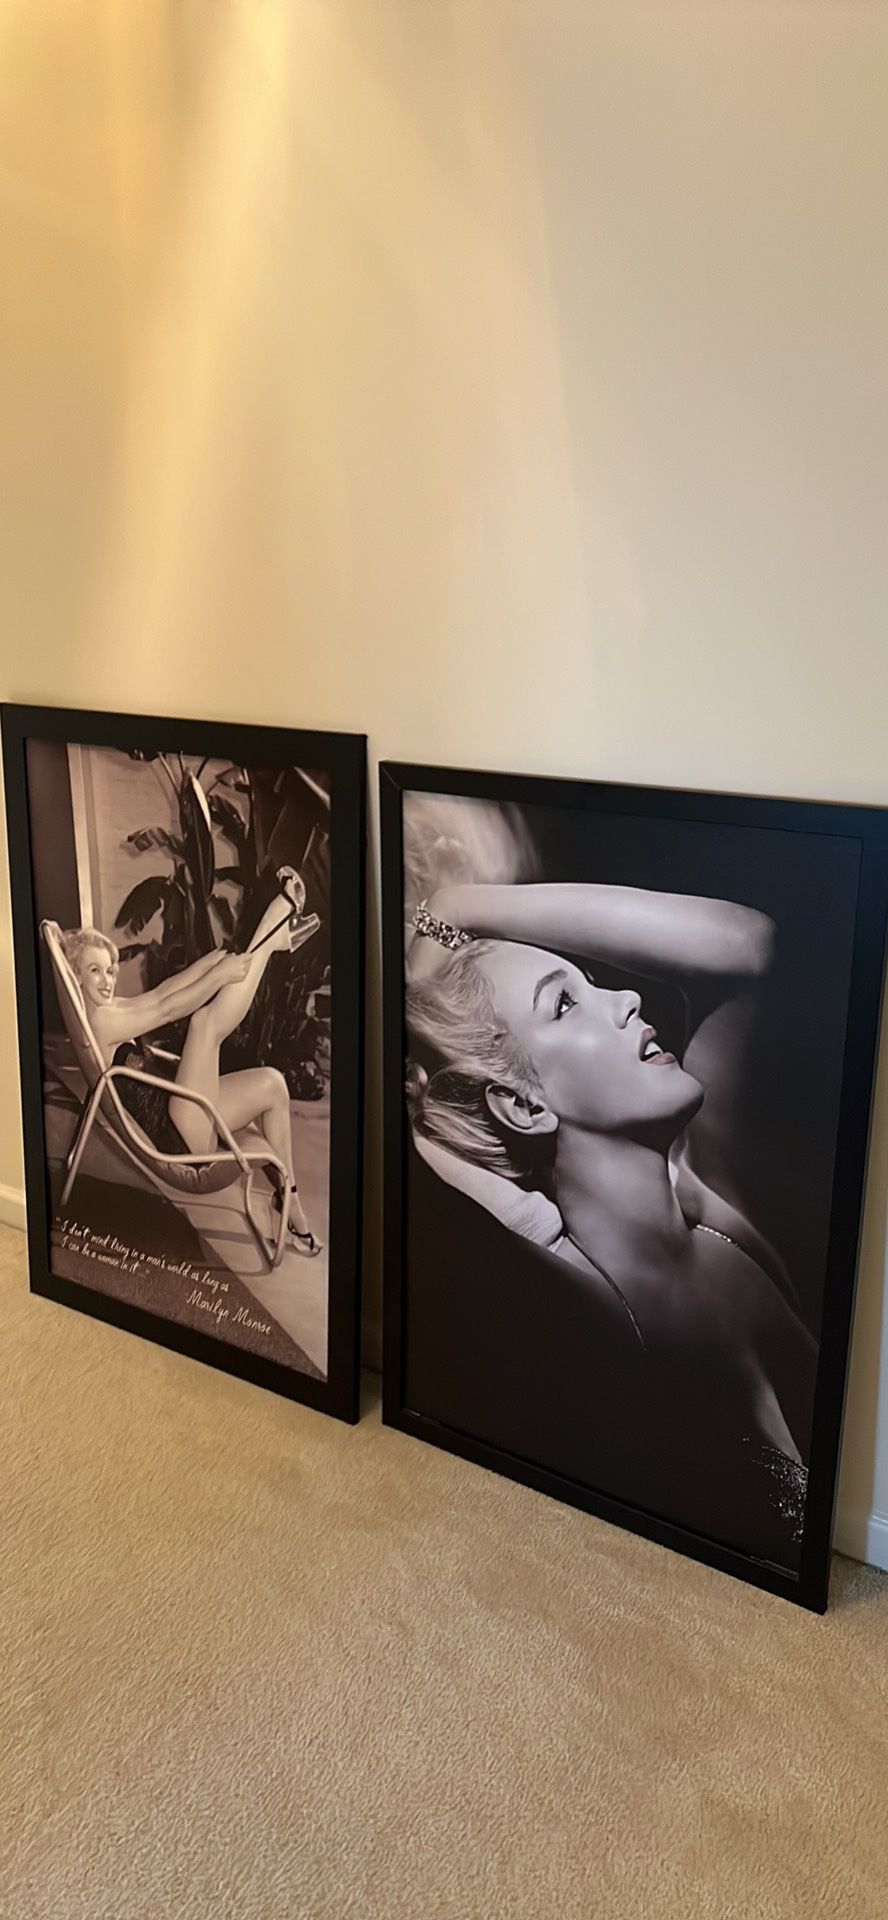 Marilyn Monroe Picture Frames For Sale -$20 Each 